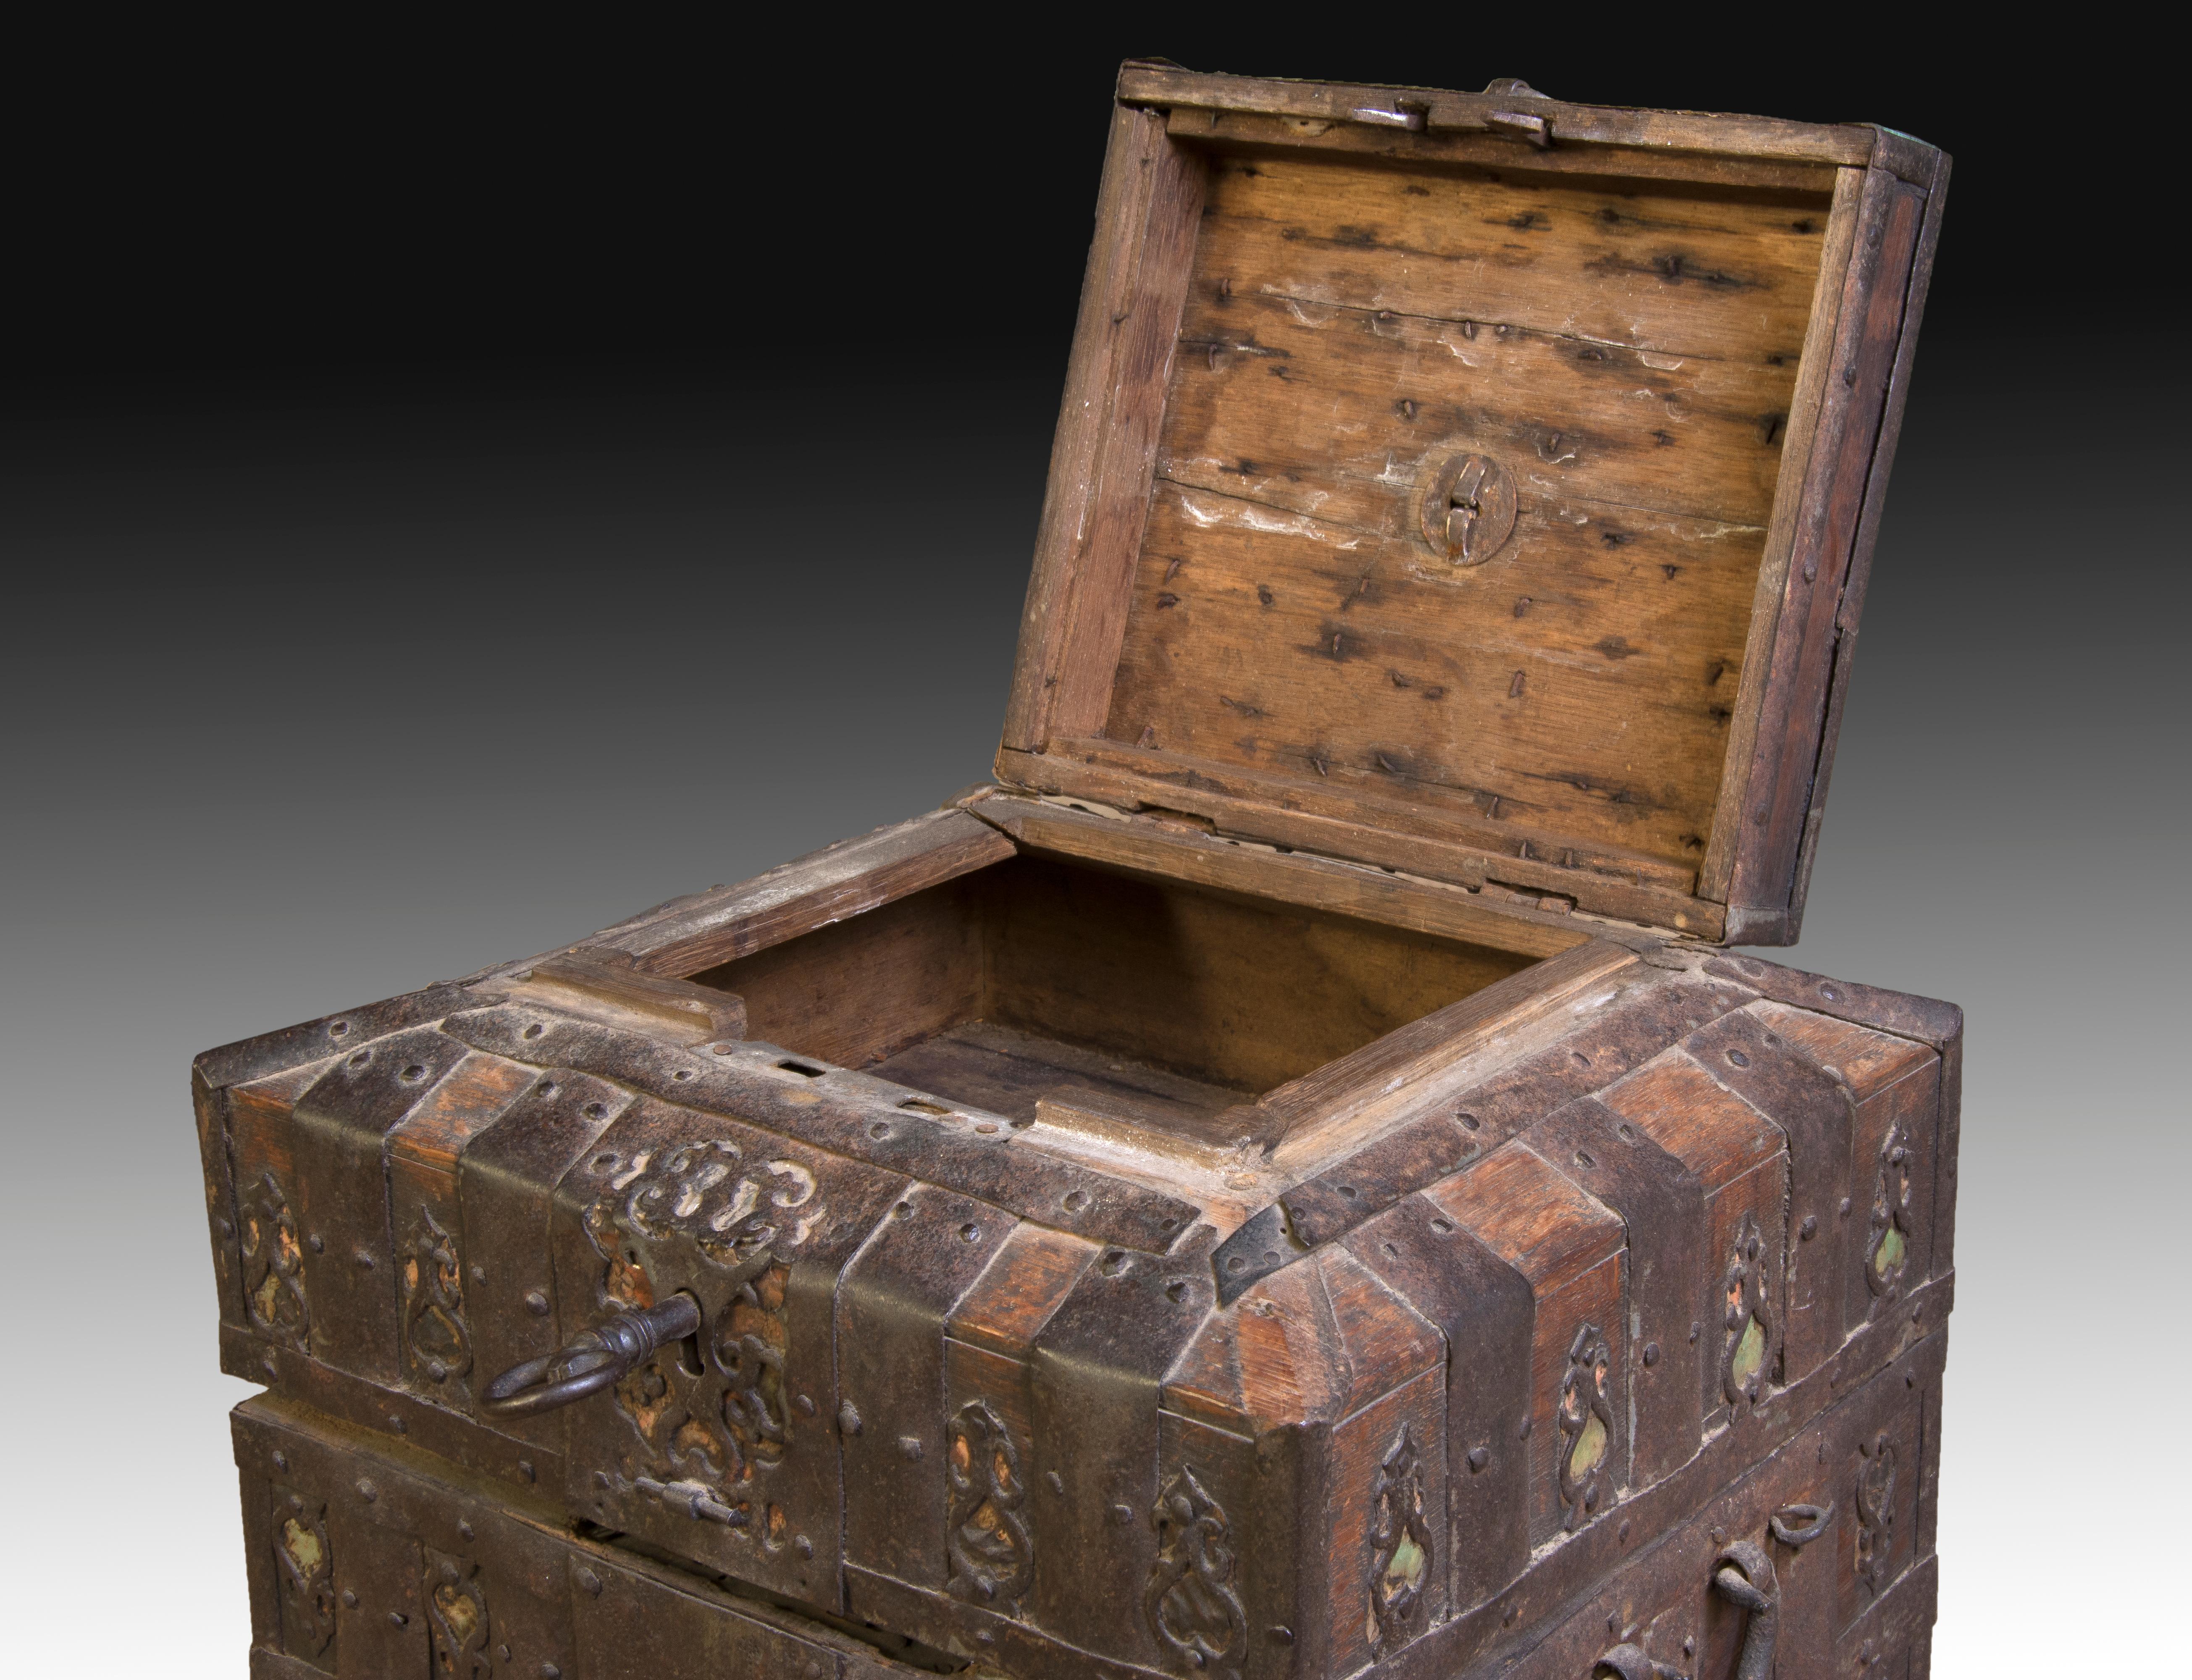 Baroque Ironbound Strongbox or Chest, Wrought Iron, Wood, Possibly Russia, 17th Century